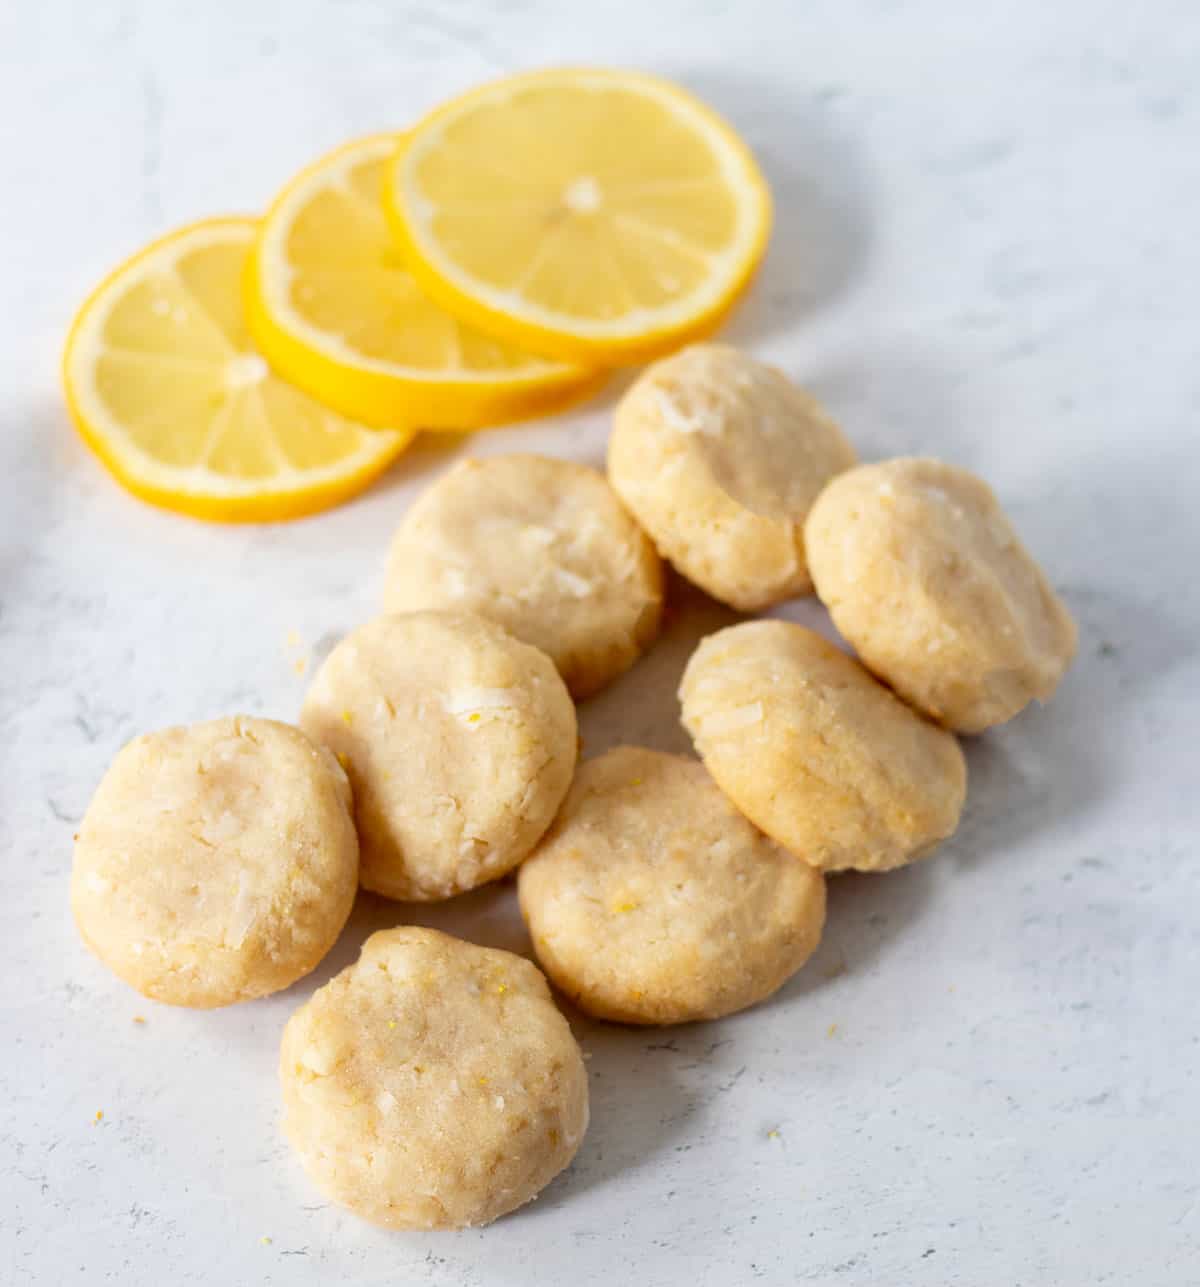 baked lemon cookies on counter with three fresh lemon slices.